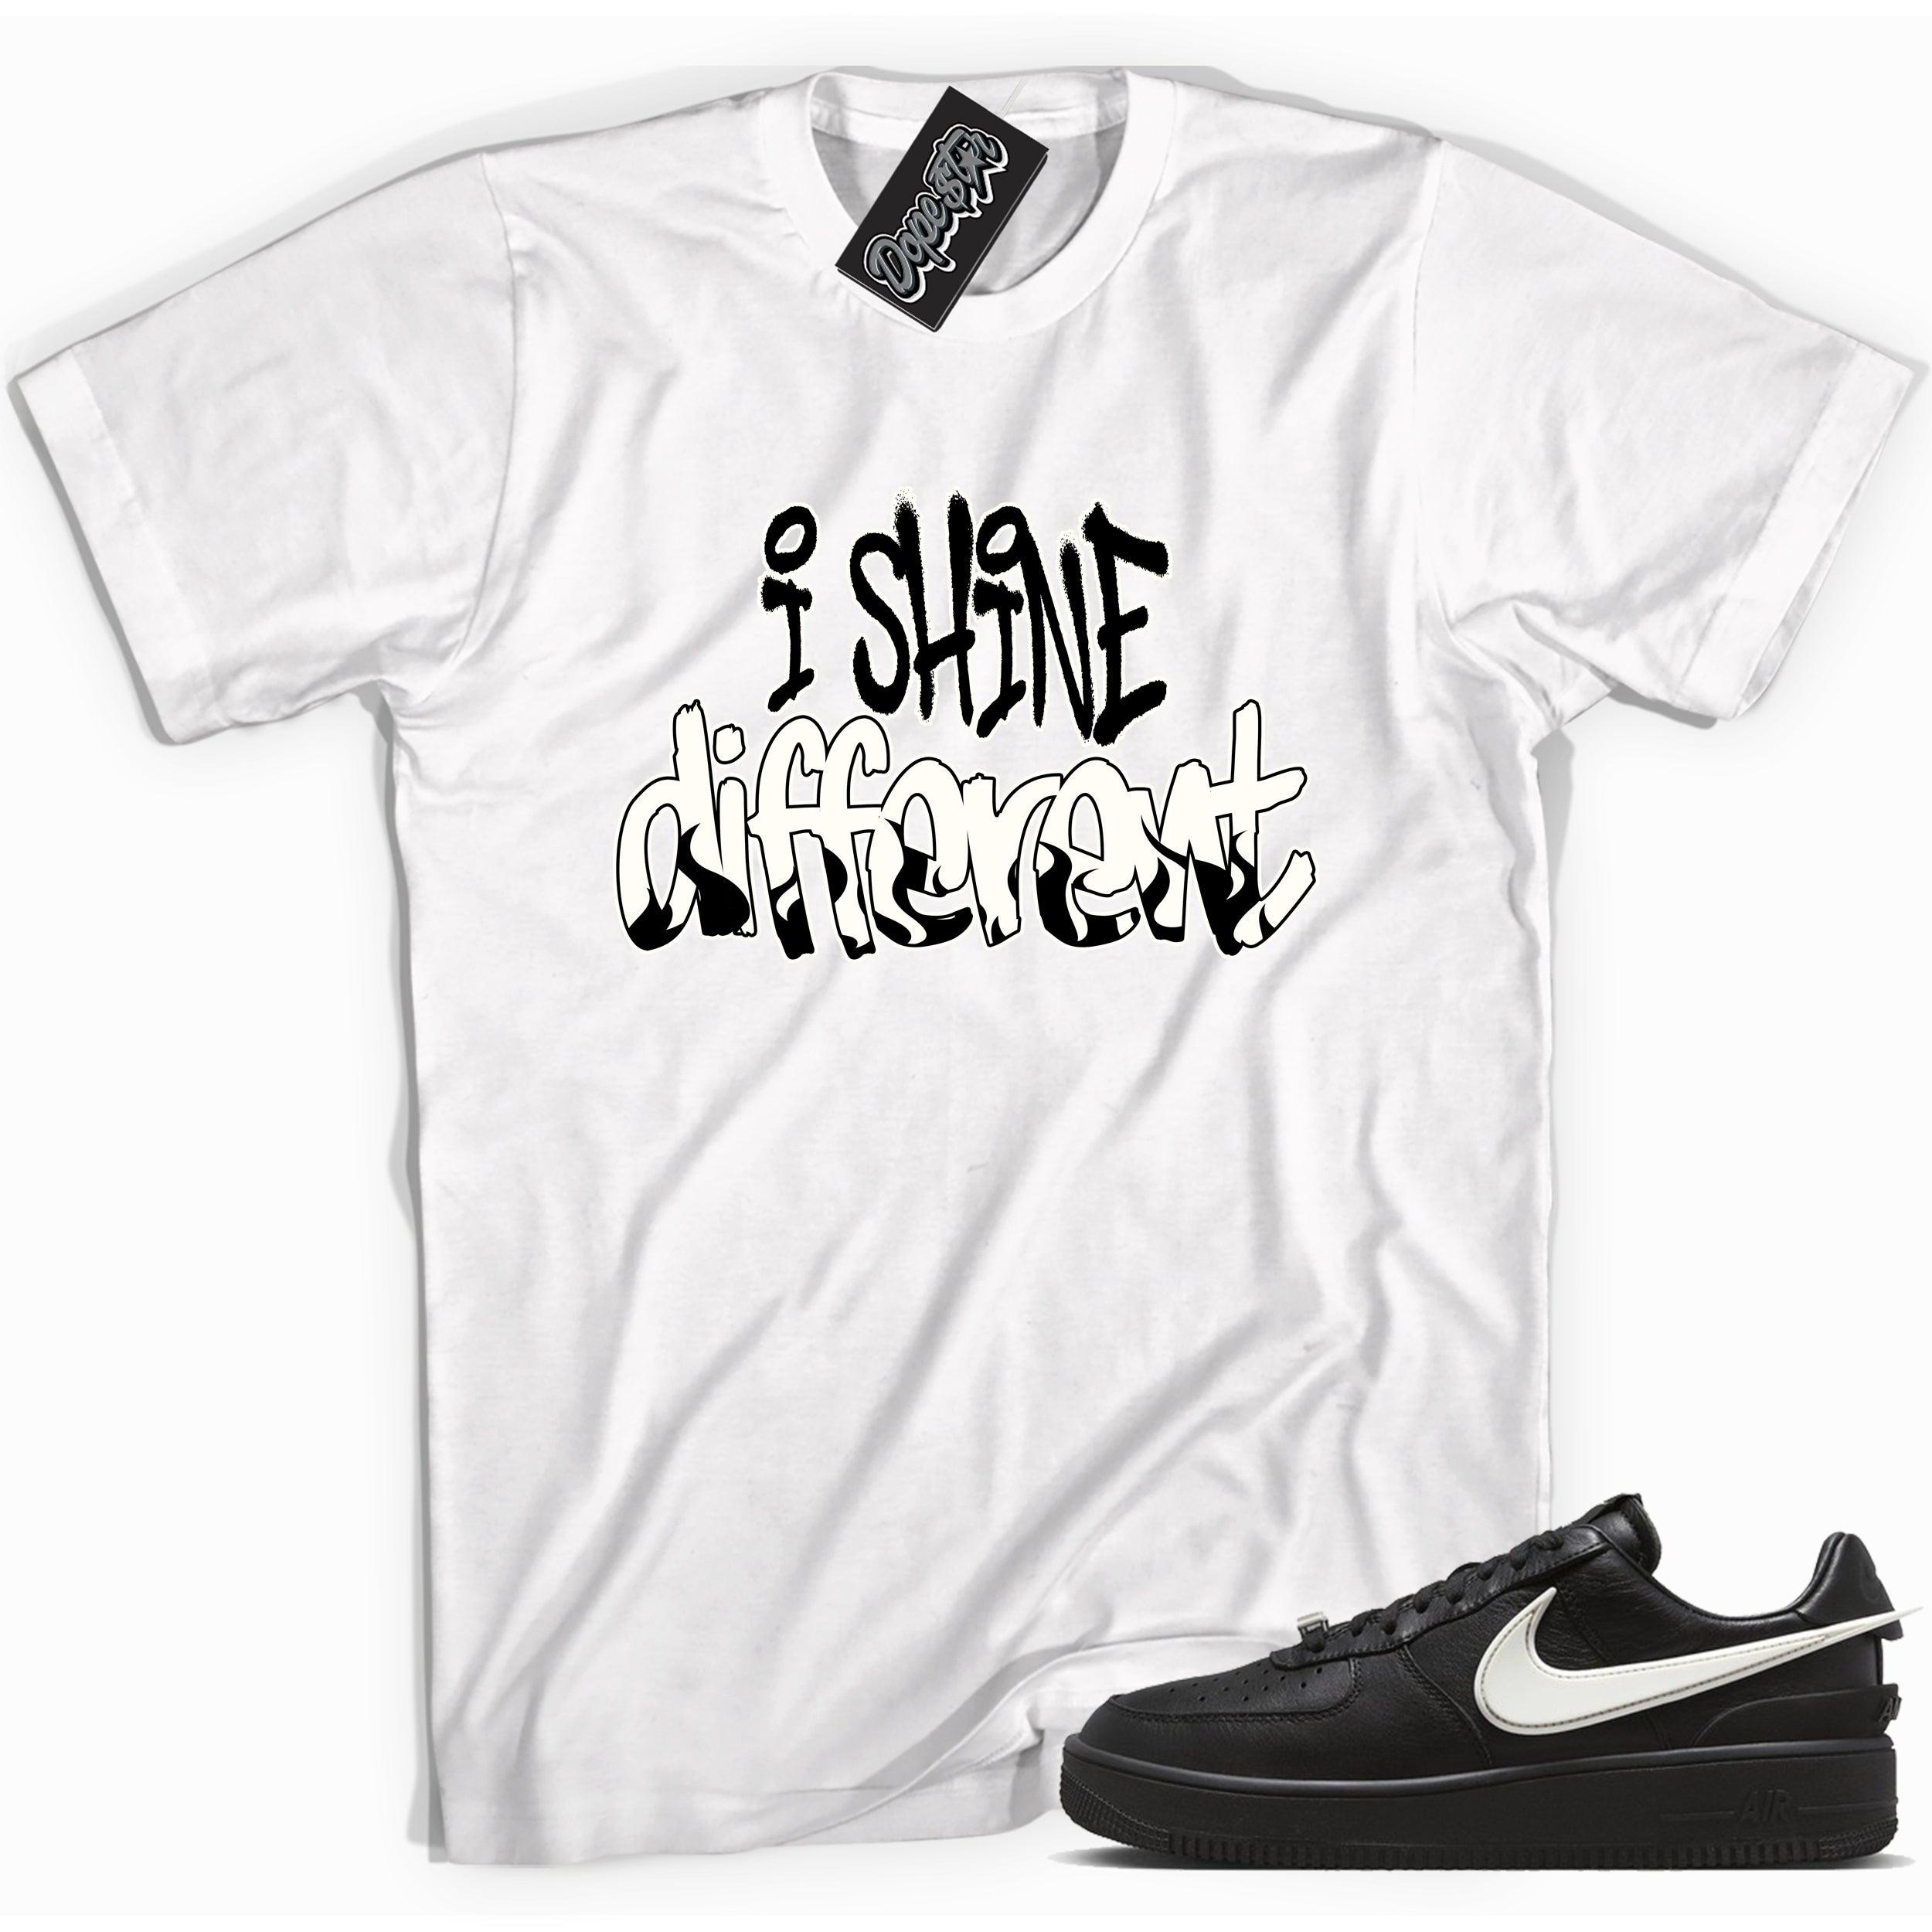 Cool white graphic tee with 'i shine different' print, that perfectly matches Nike Air Force 1 Low Ambush Phantom Black sneakers